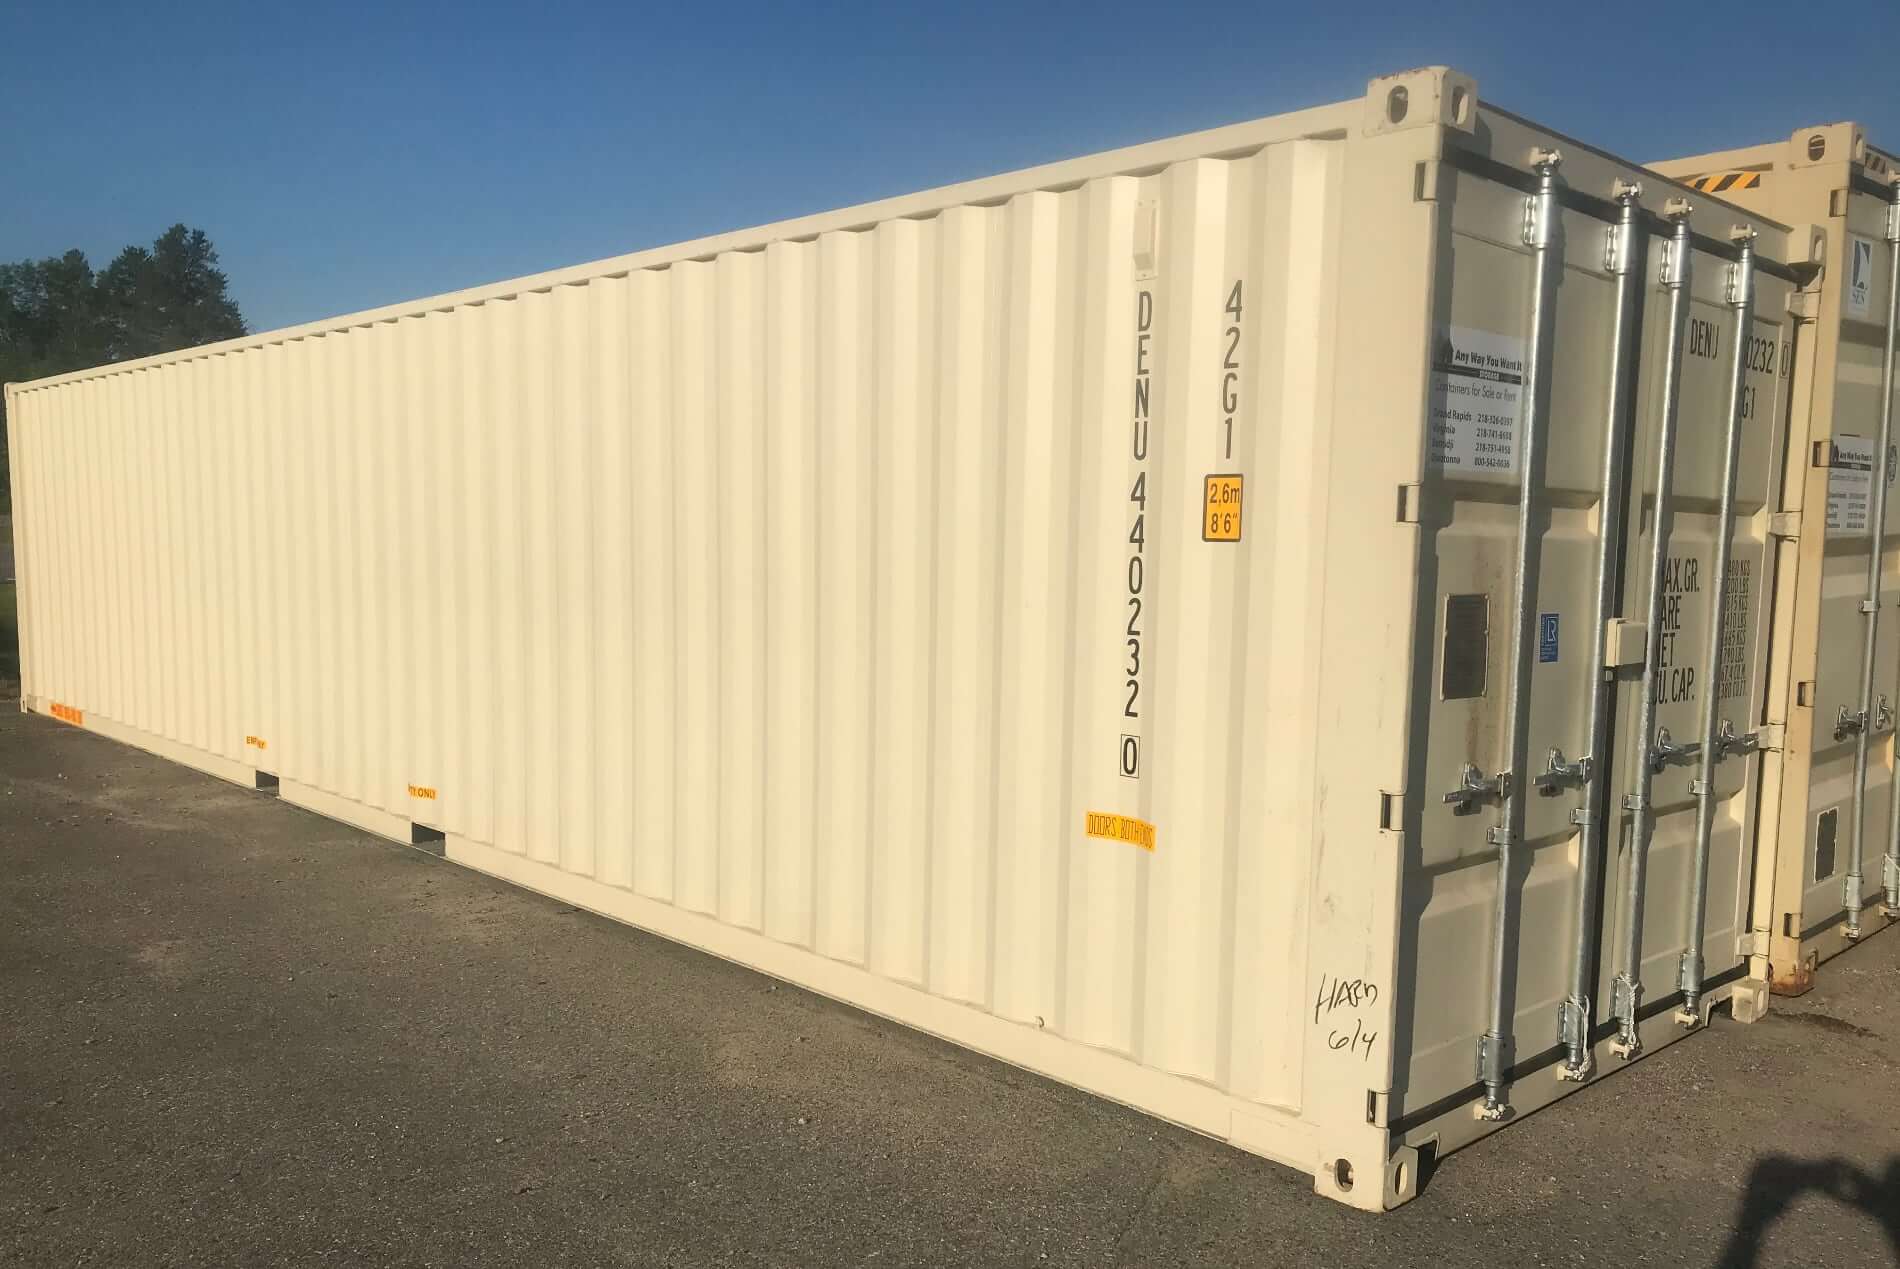 https://anywaystorage.com/wp-content/uploads/2022/09/new-40-ft-shipping-container.jpg